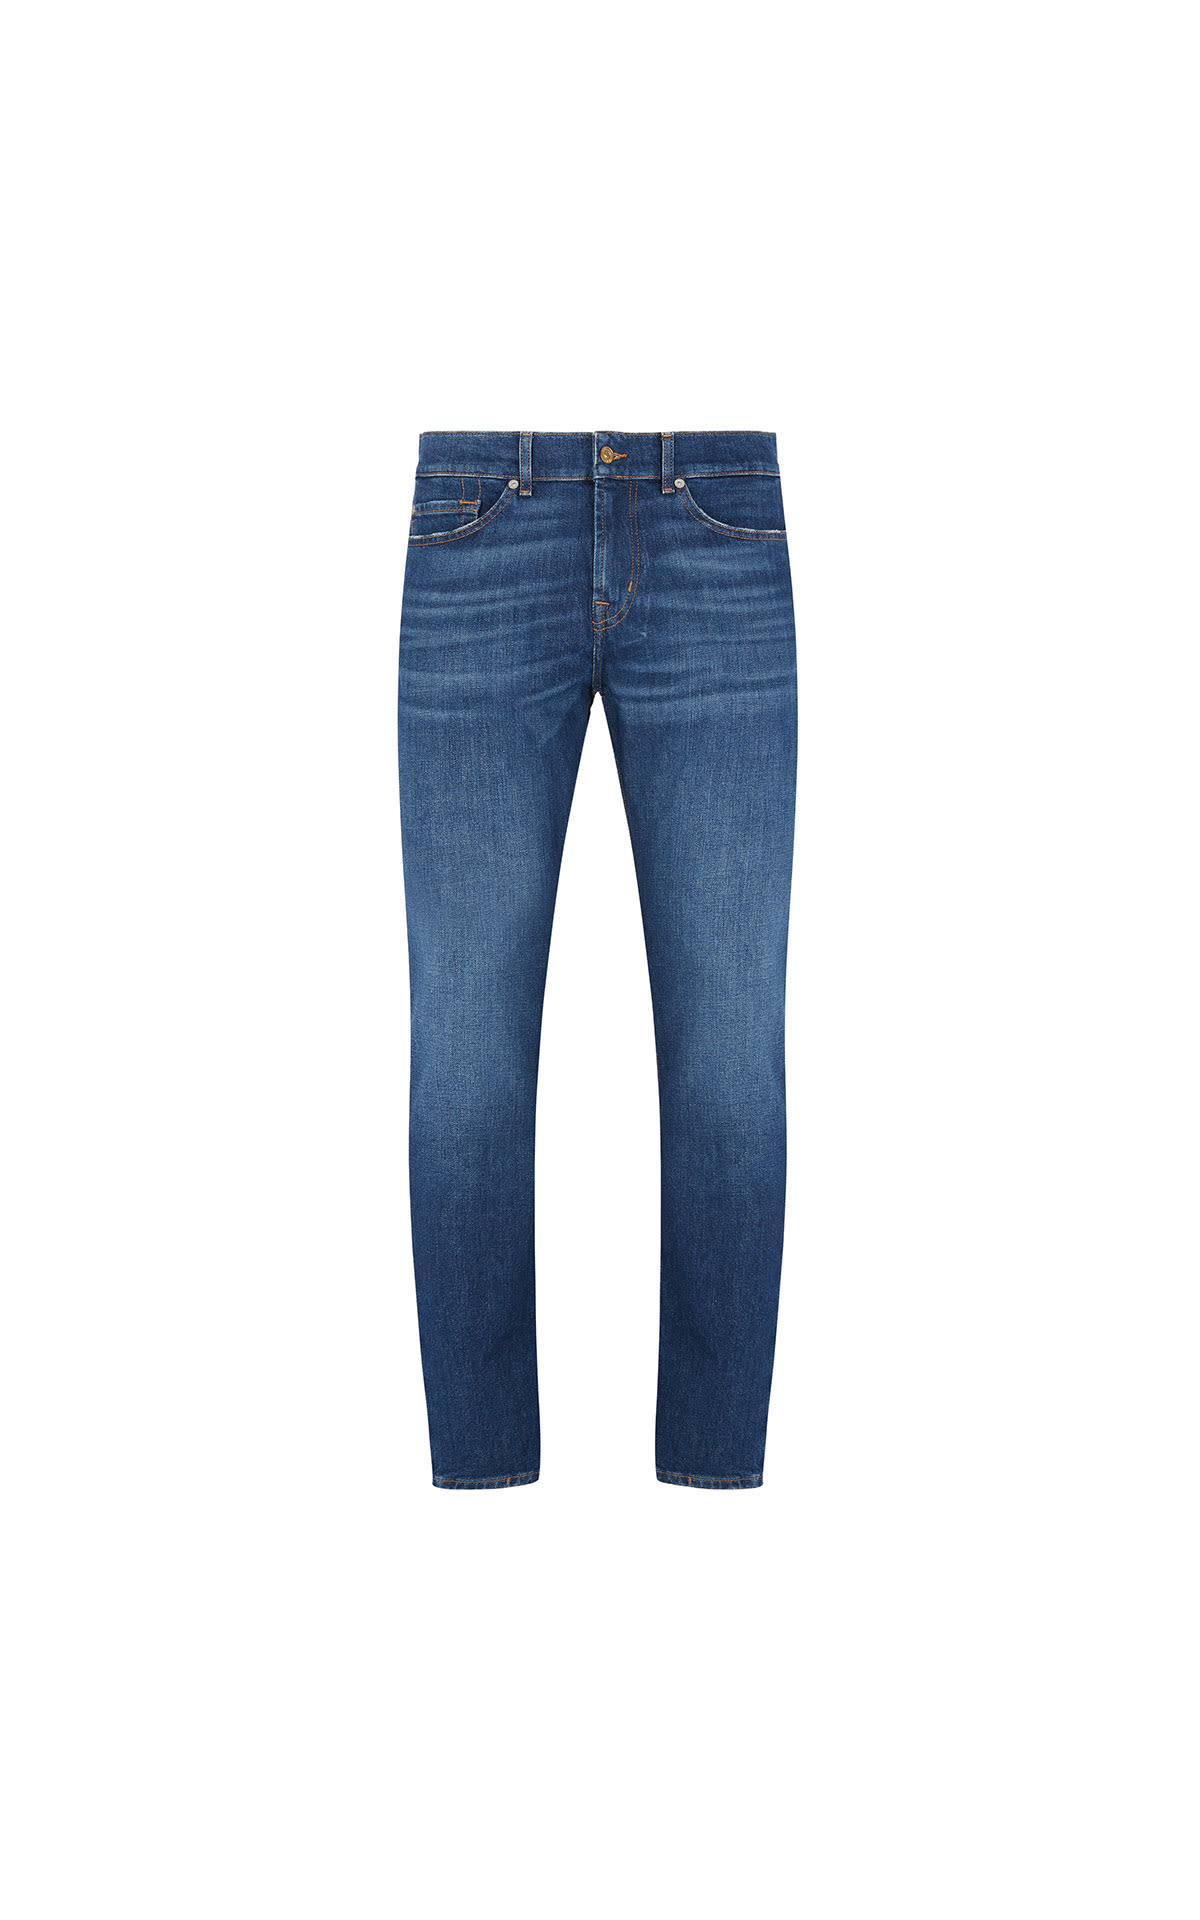 7FAMK Ronnie mid waist skinny jeans from Bicester Village